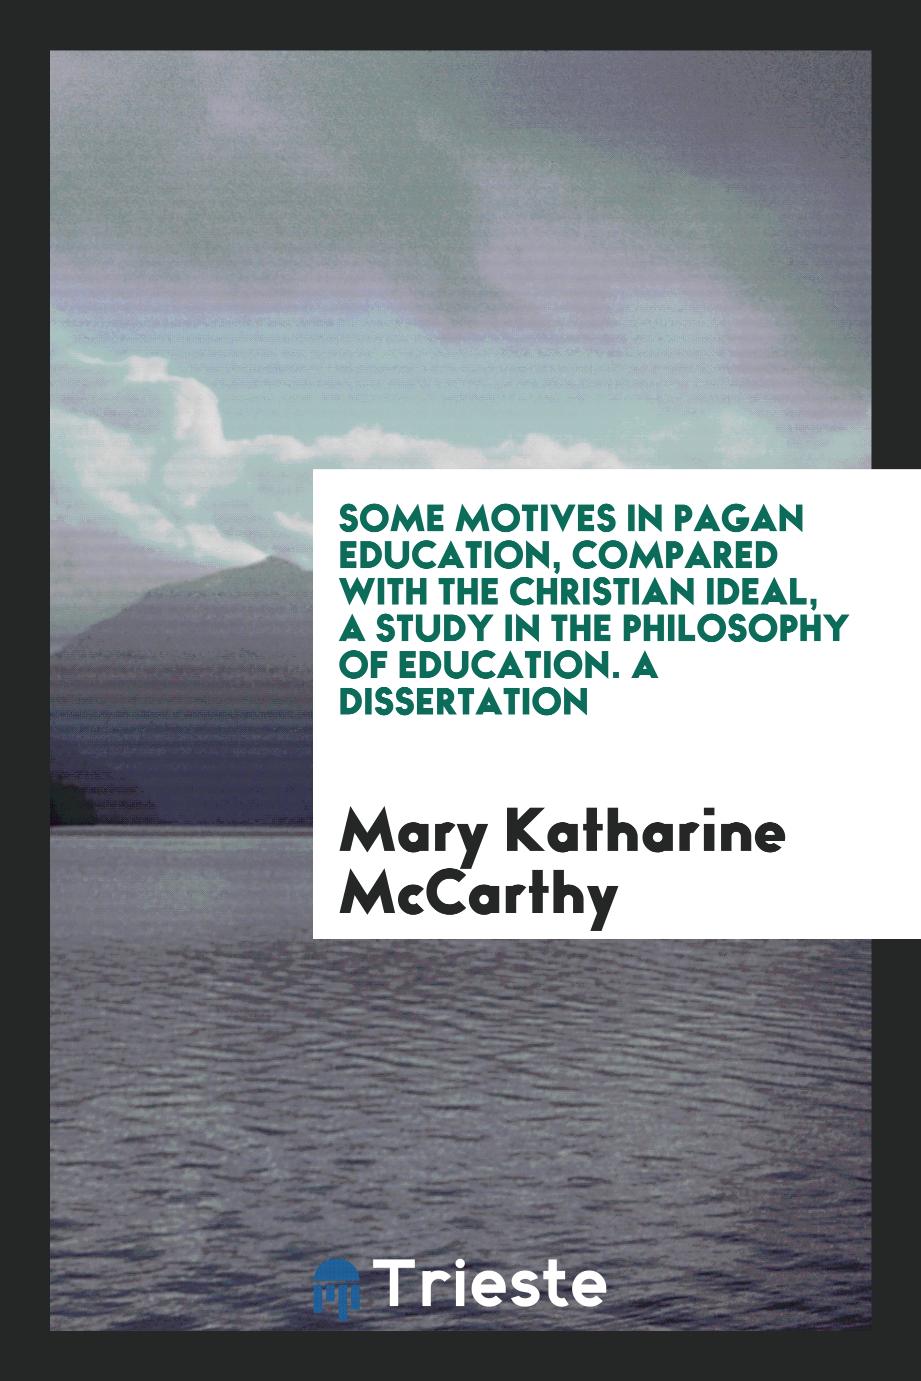 Some Motives in Pagan Education, Compared with the Christian Ideal, A study in the Philosophy of Education. A Dissertation